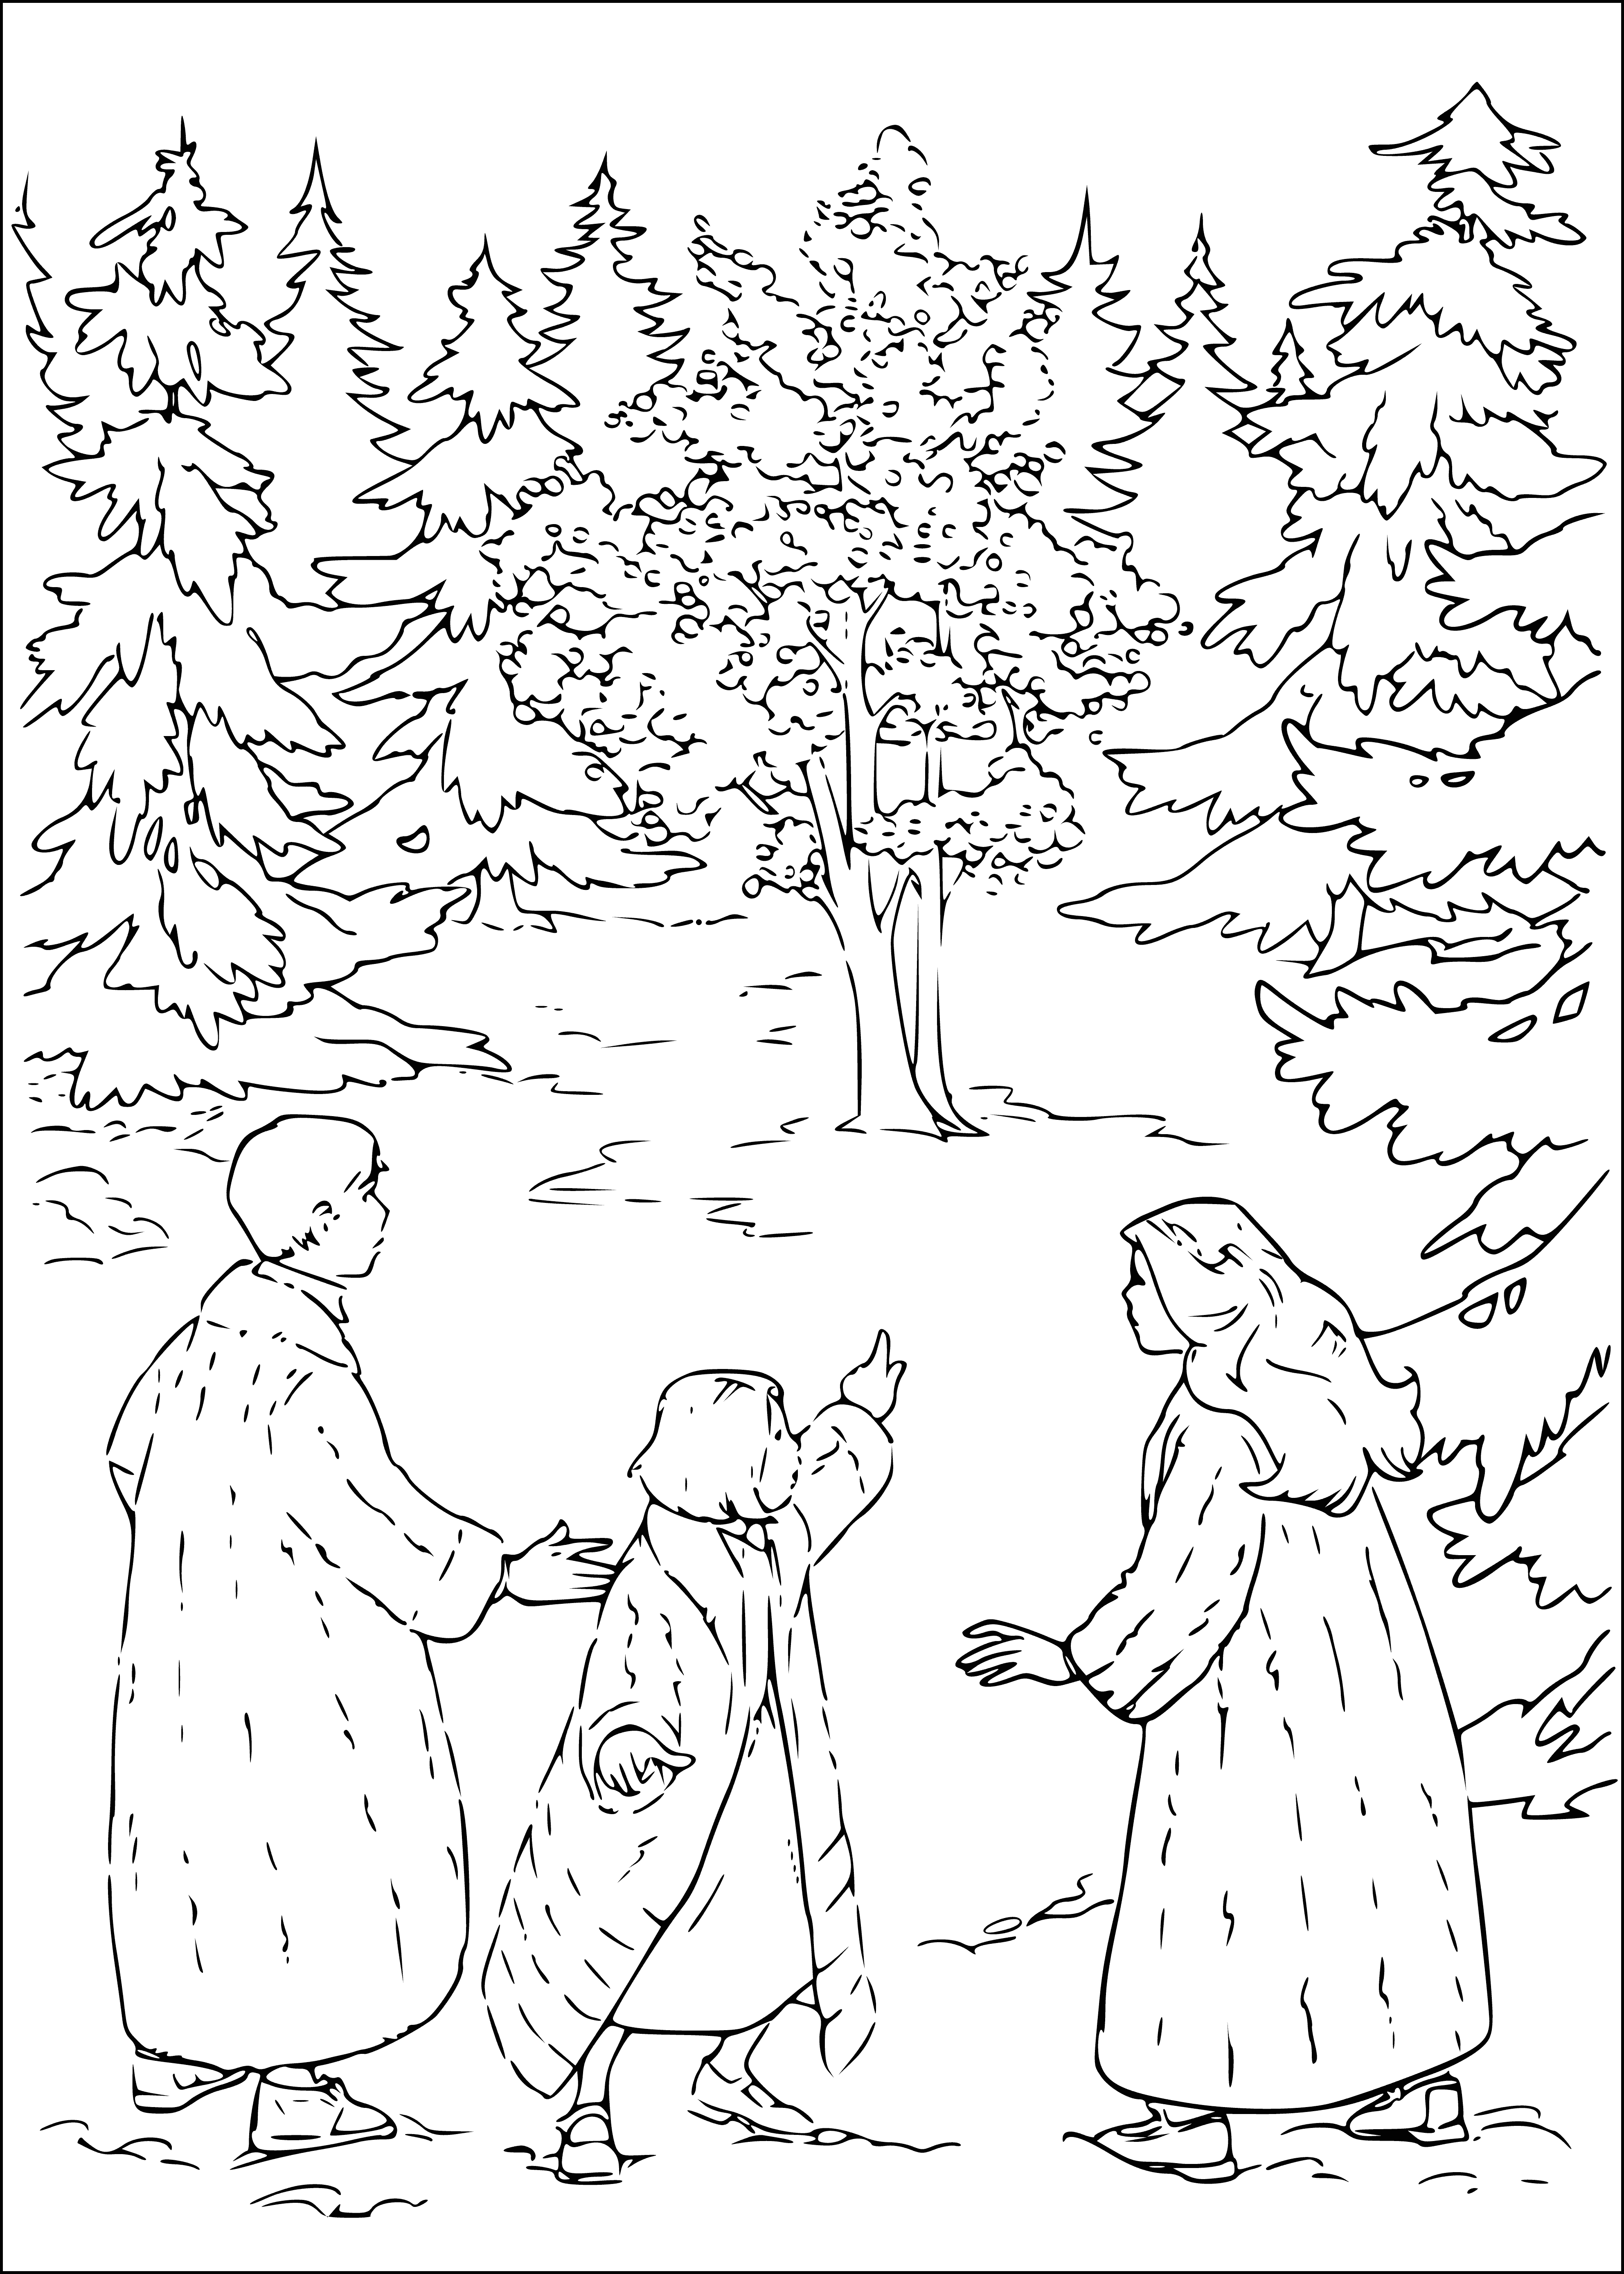 Magic apple tree coloring page